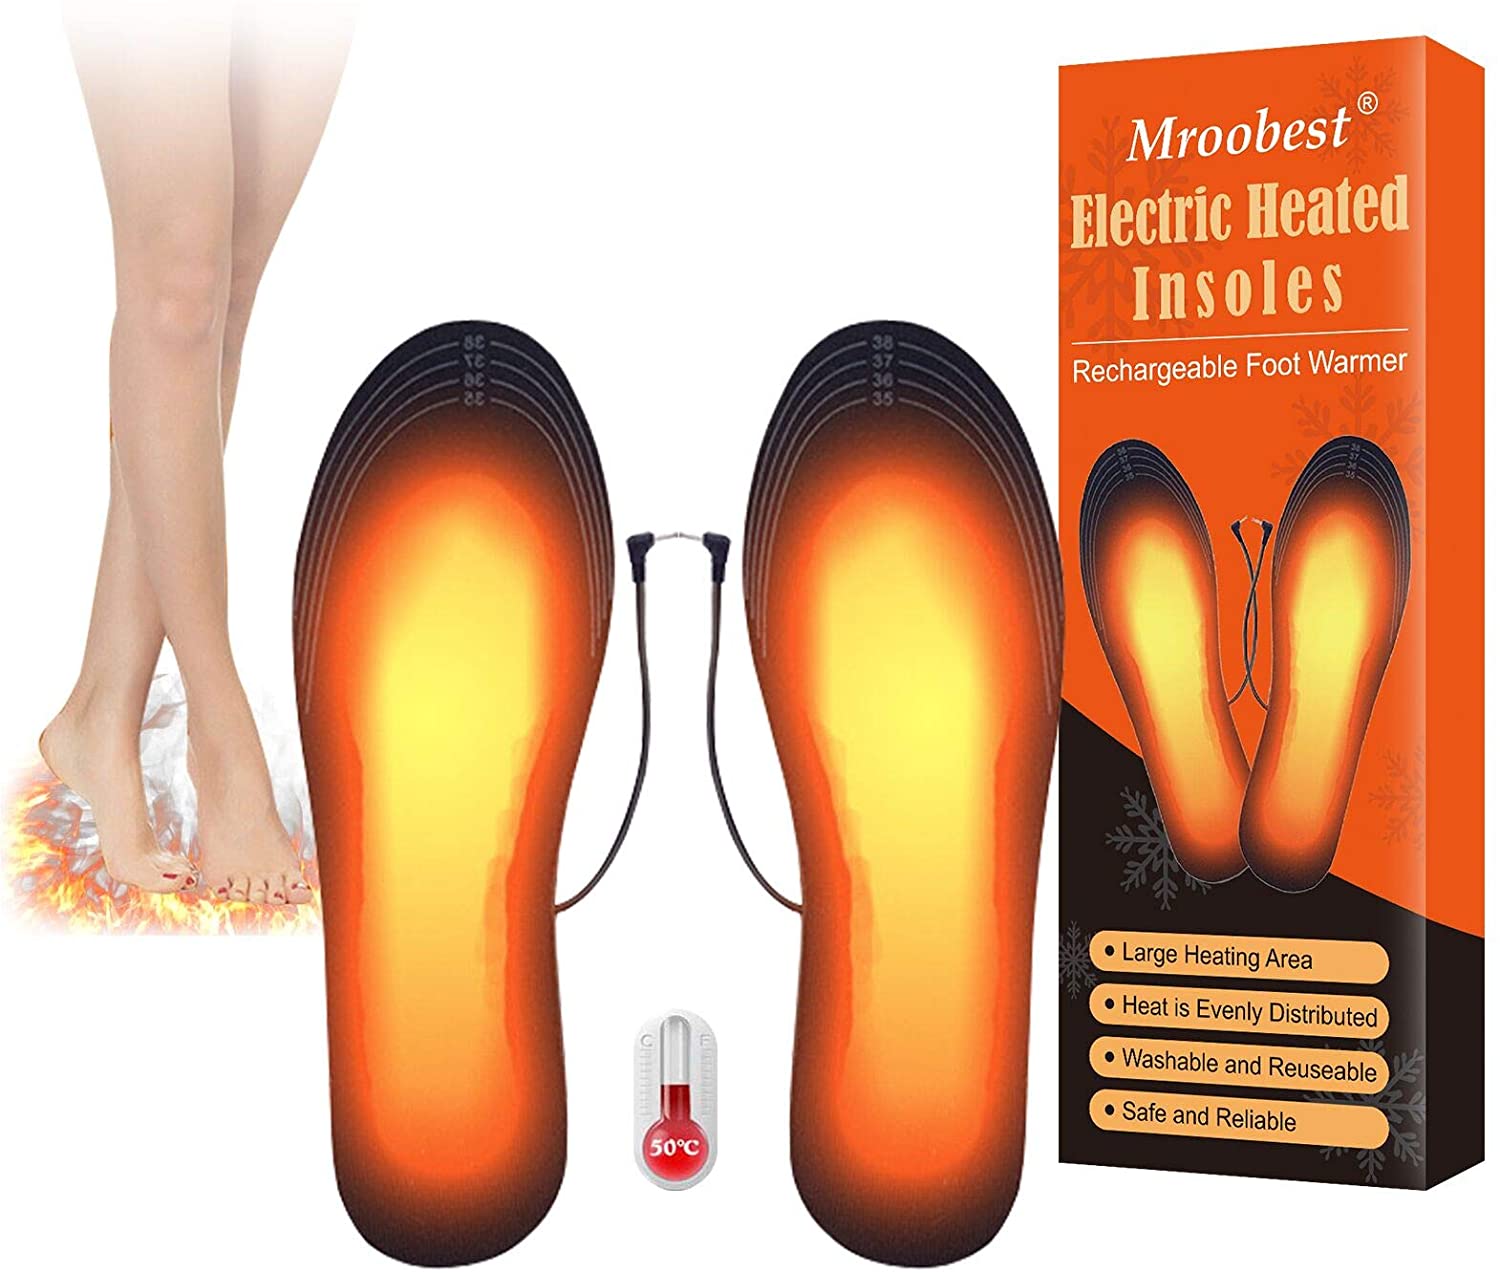 Mroobest Electric Heated Insoles, Thermal Insoles, USB Rechargeable Shoe Heating, Washable Heated Shoes Pad, Warm feet on Winter Adventures Like Hunting, Working, Skiing - Home Decor Gifts and More